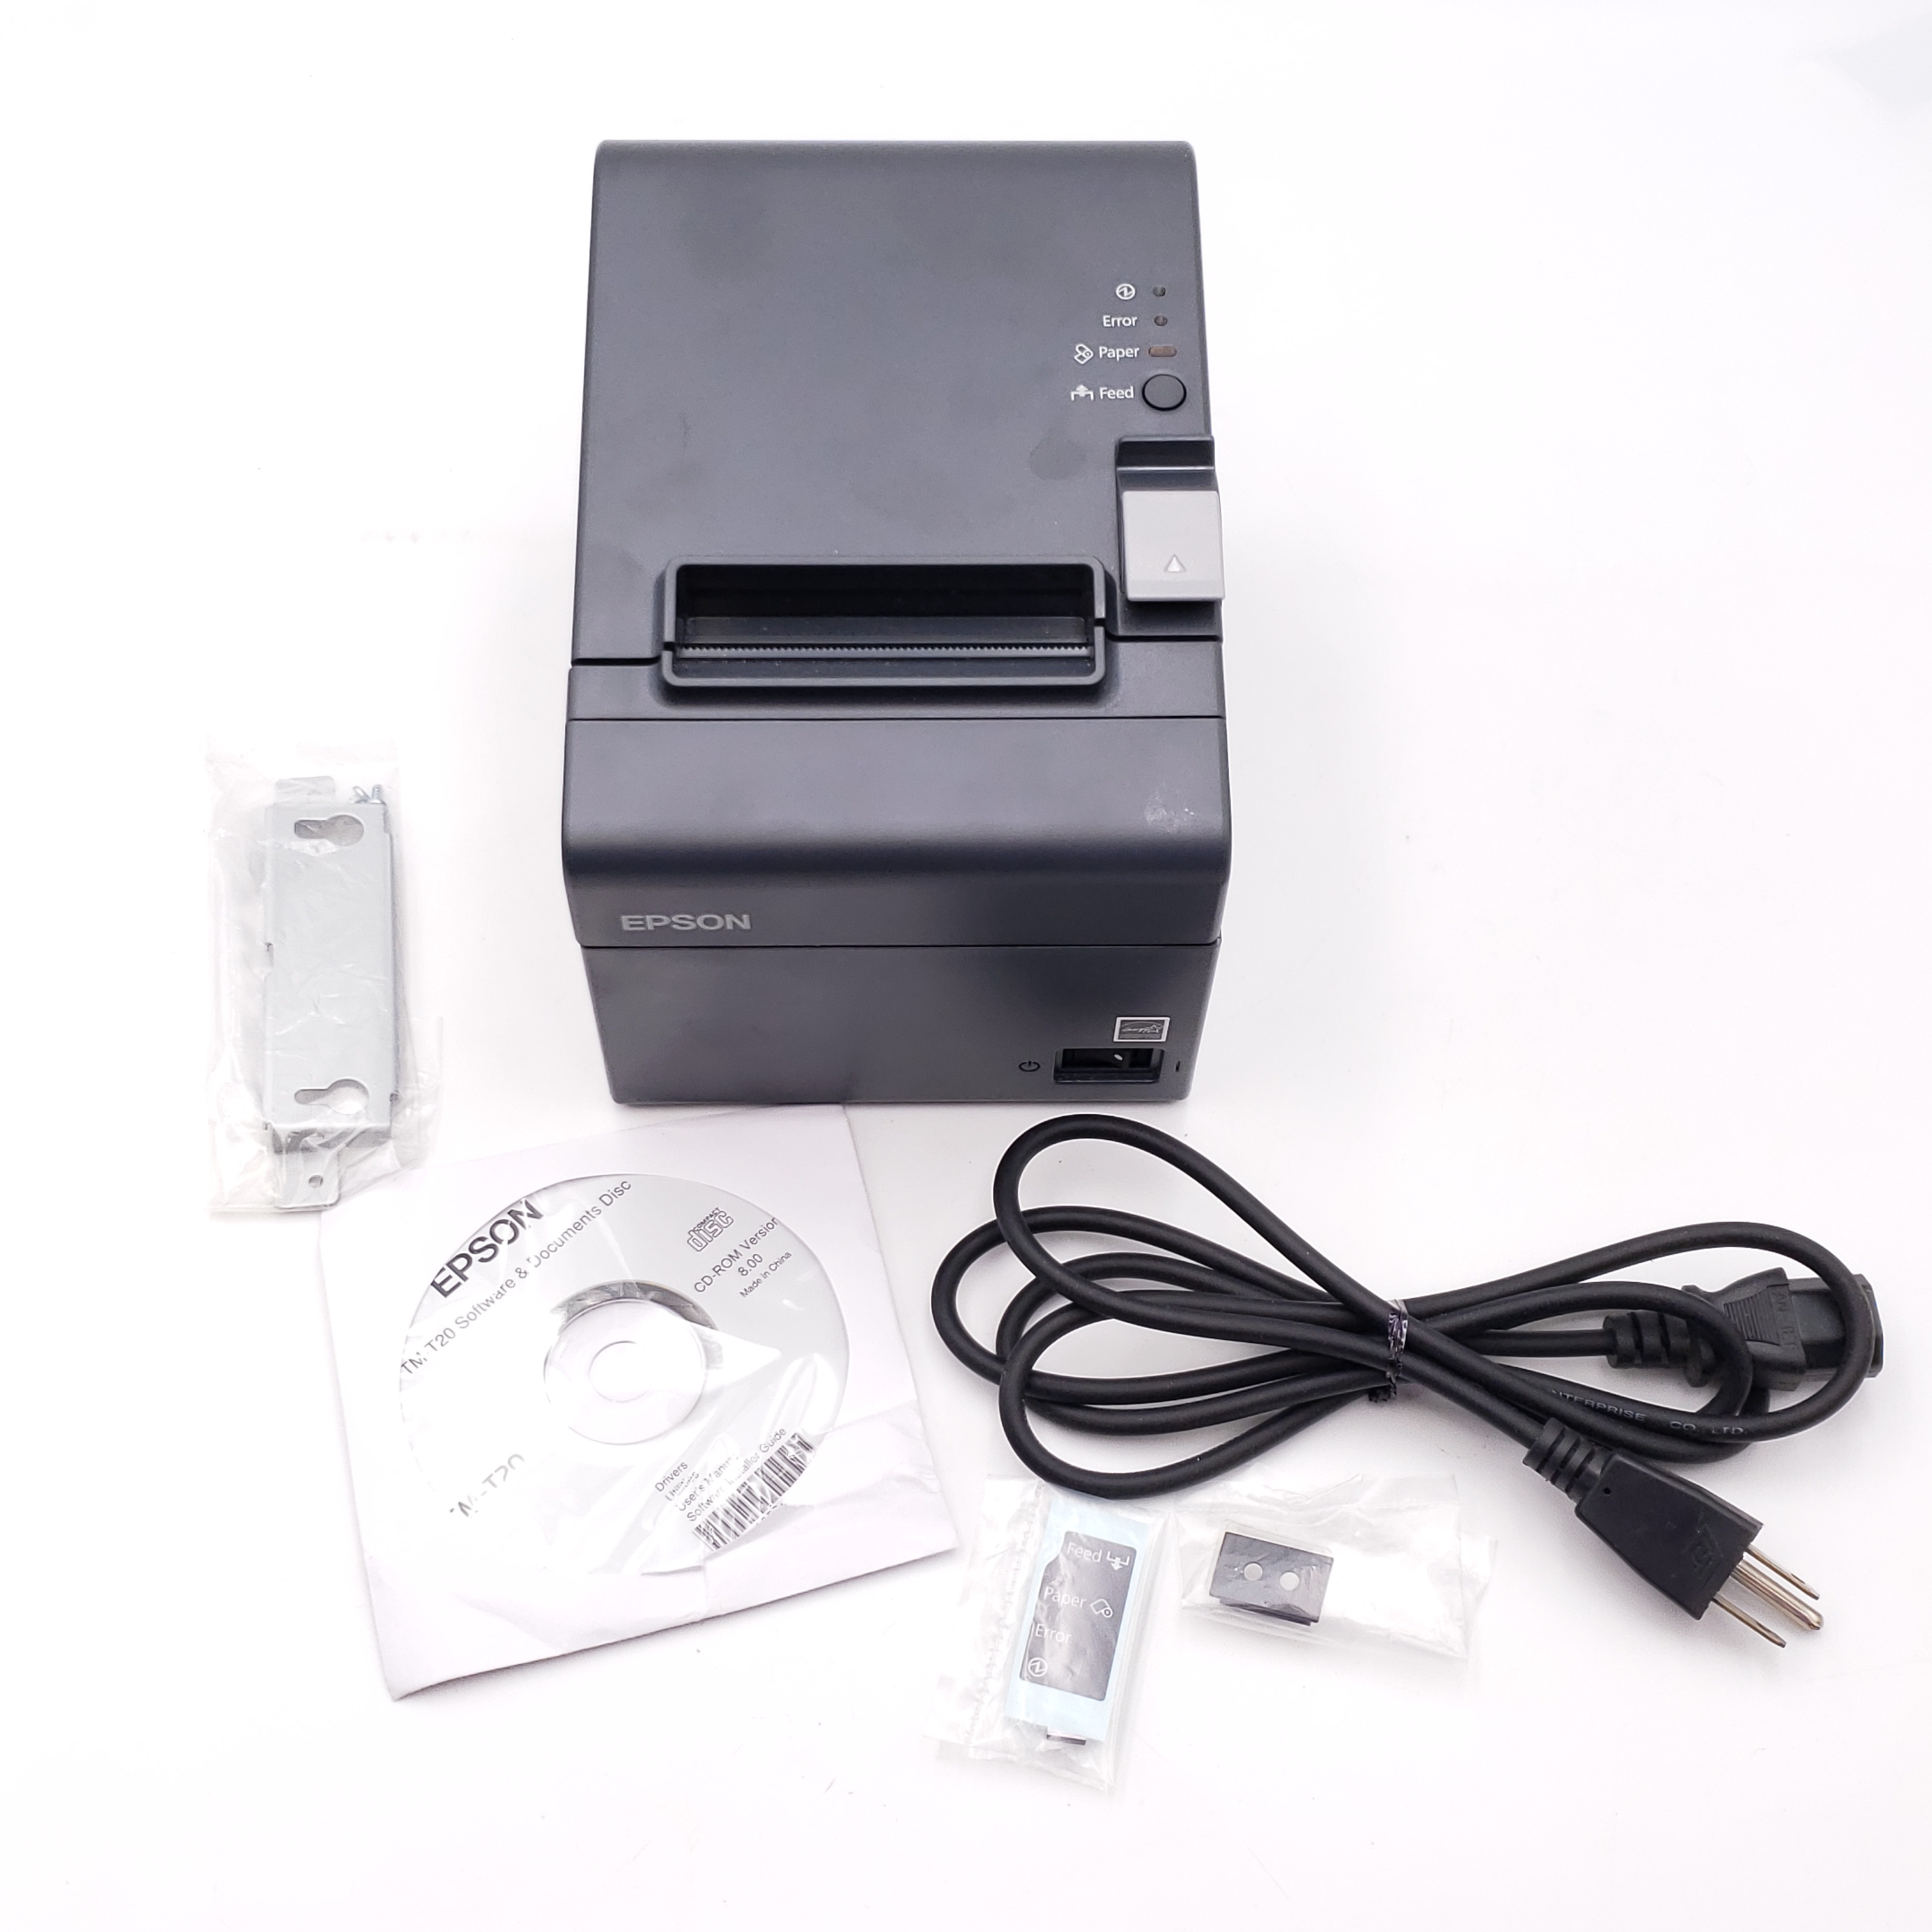 Epson TM-T20 M249A POS Thermal Receipt Printer USB Tested includes 2 cables 